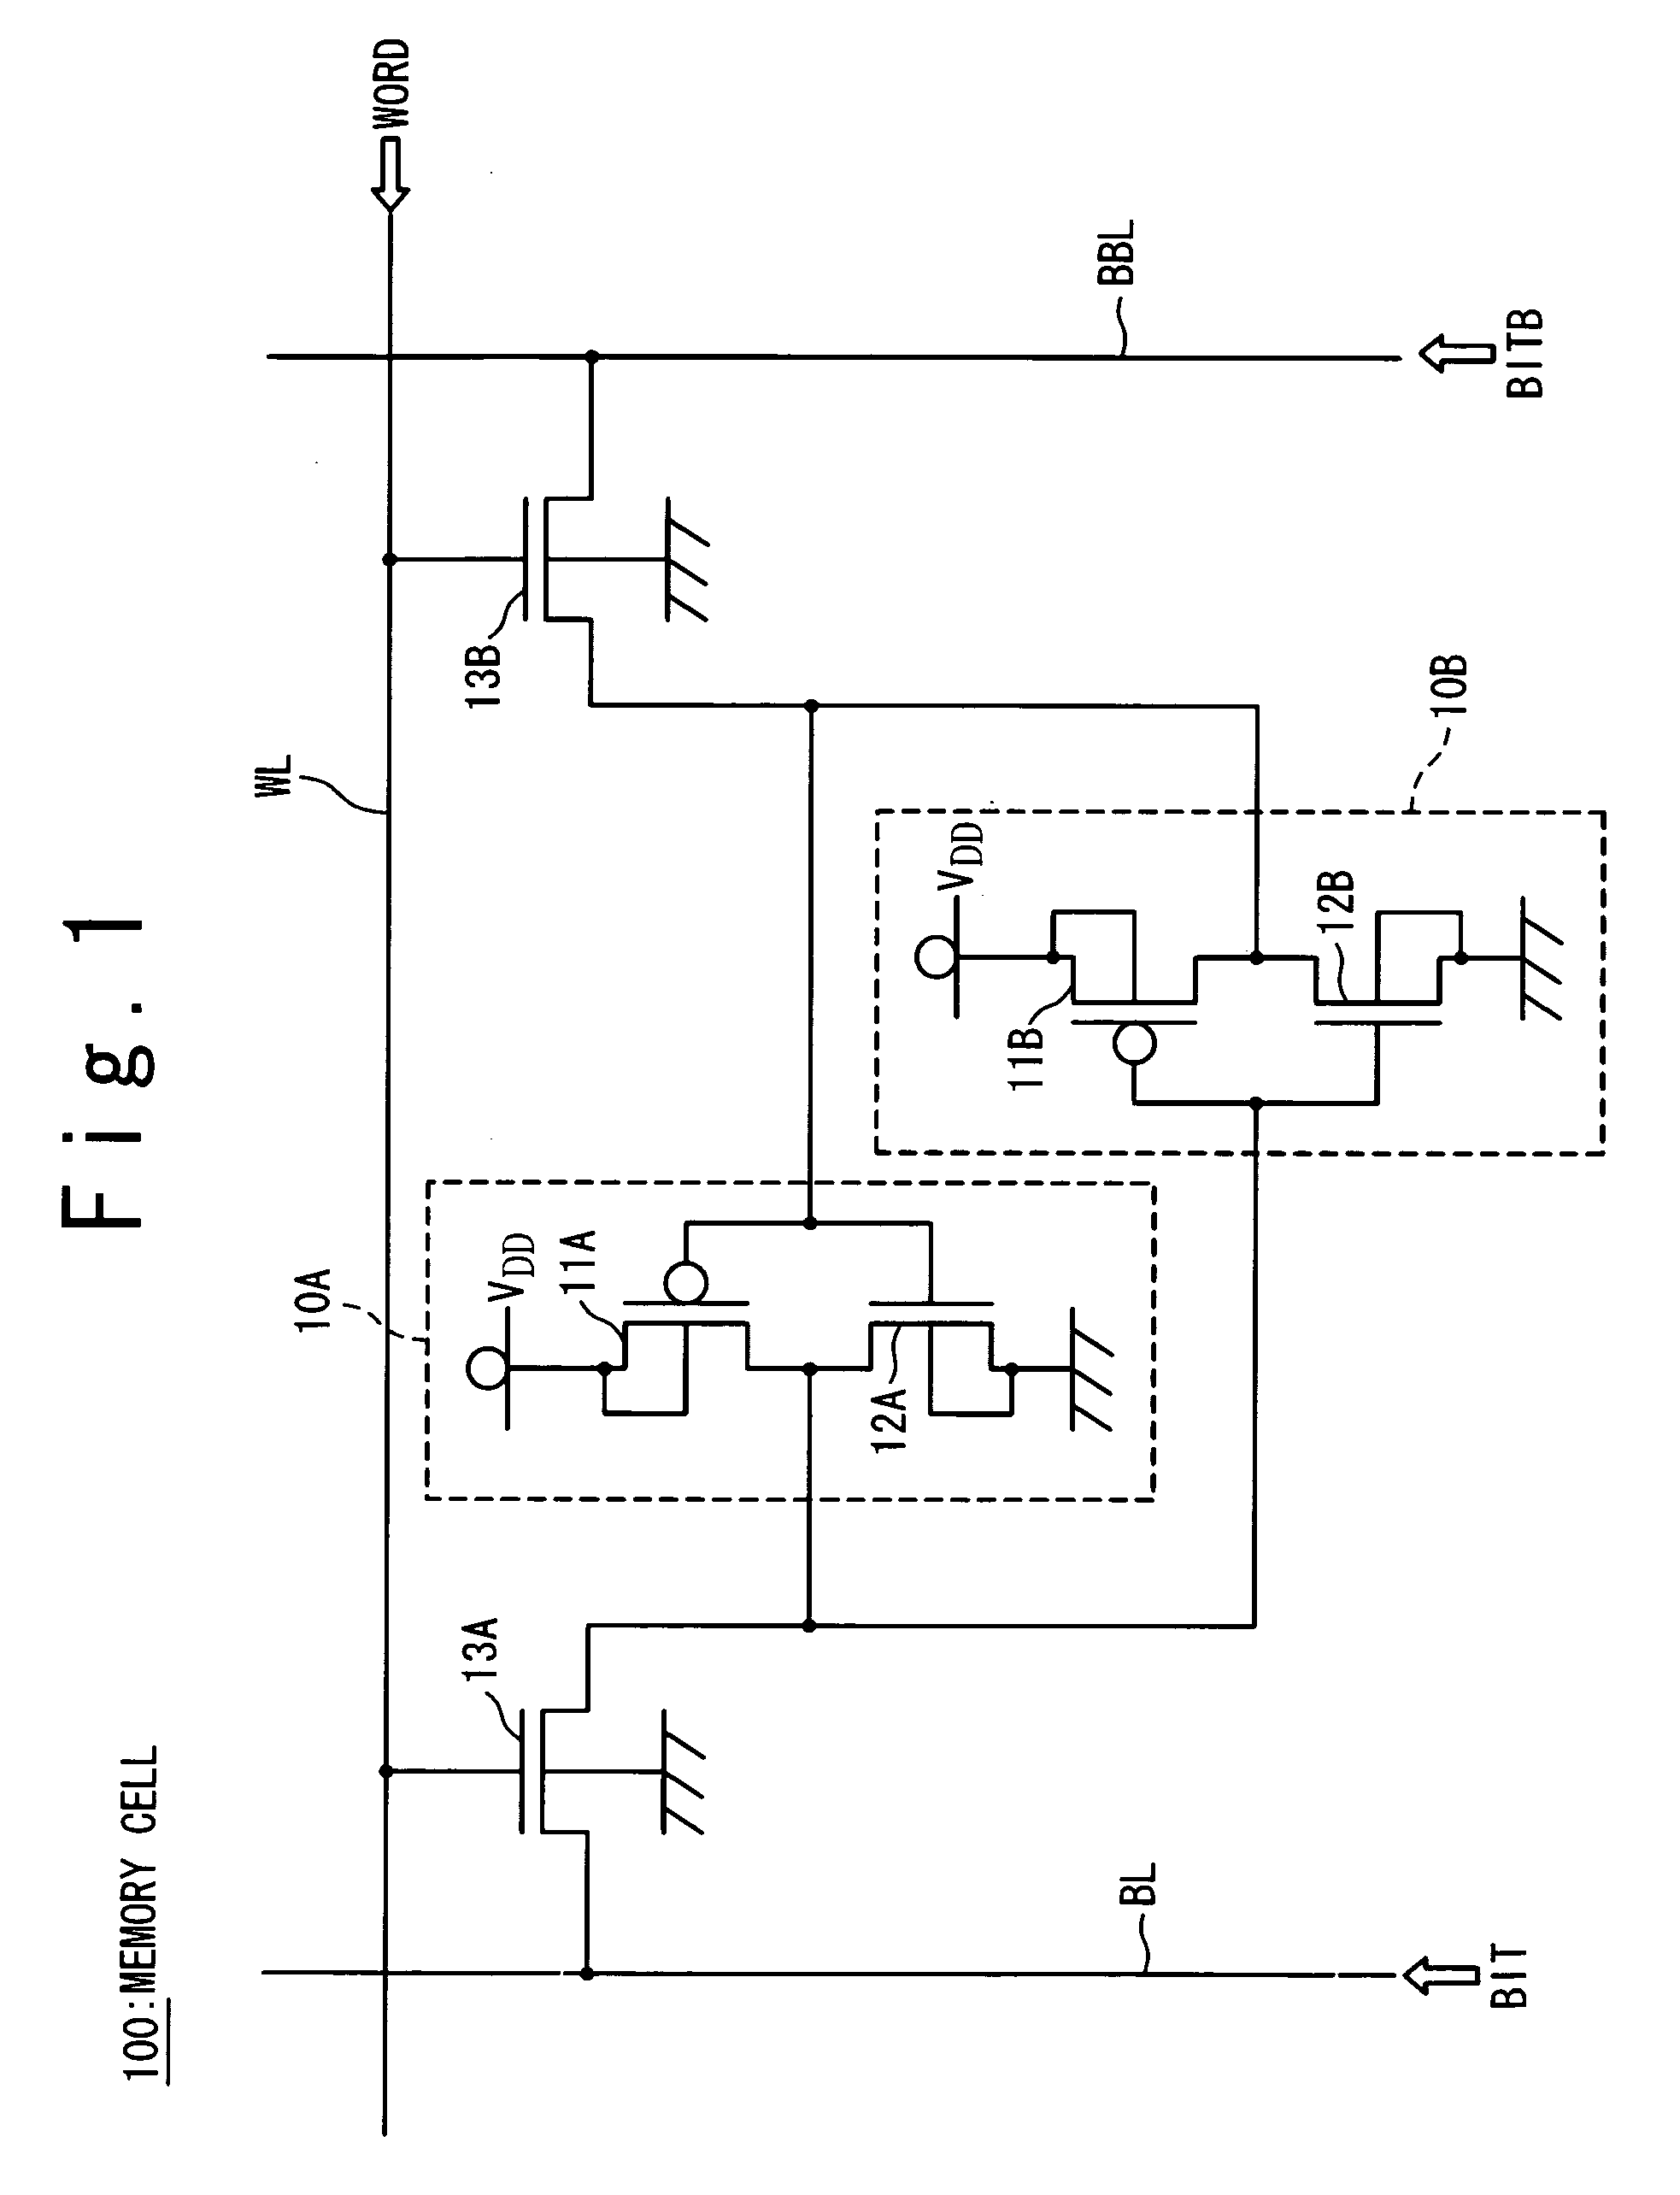 Static semiconductor memory device